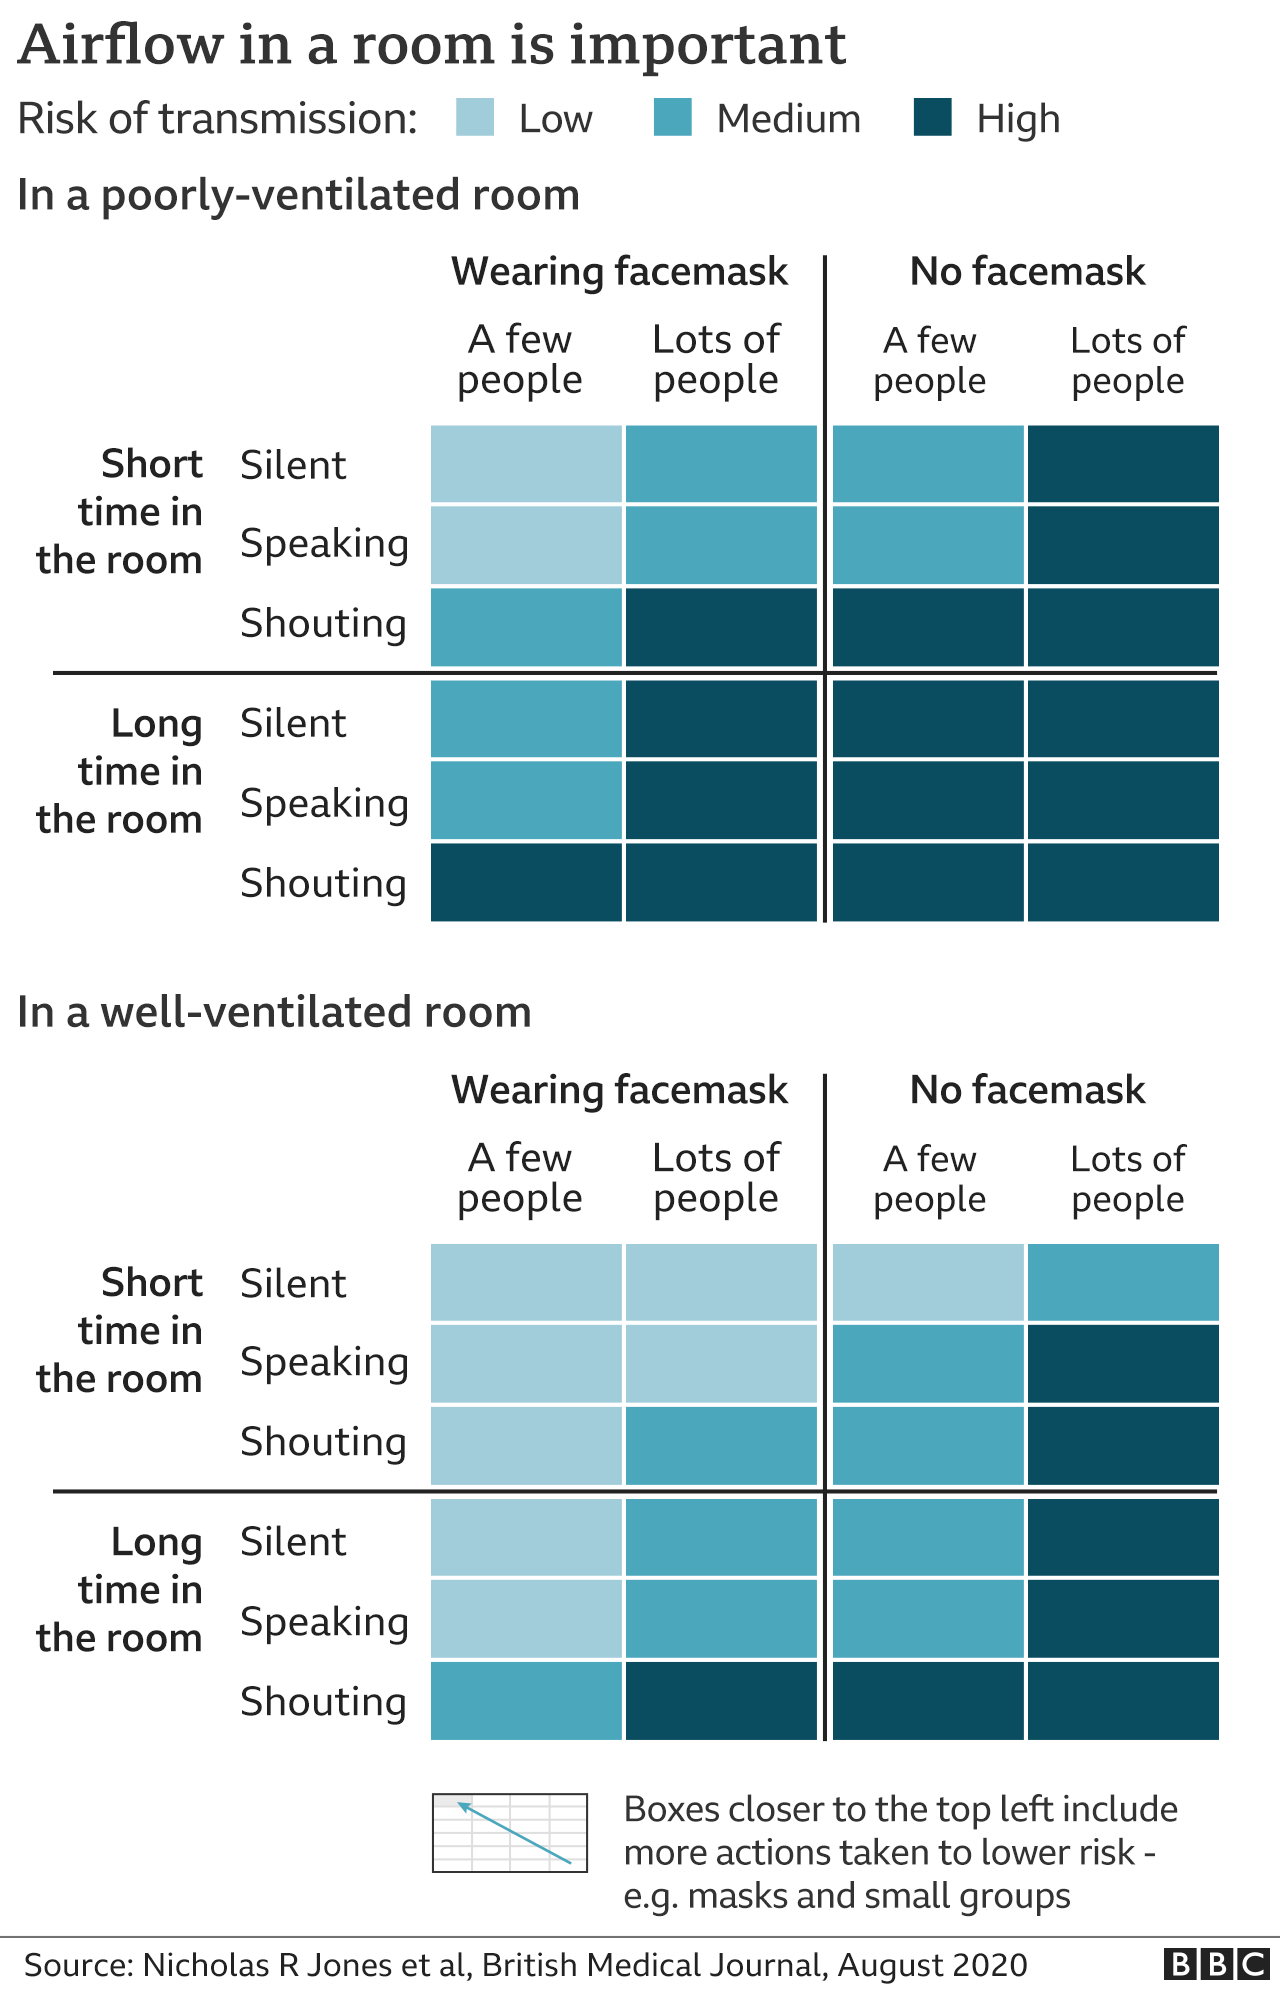 Grid showing the relative risks of being in a well-ventilated and poorly ventilated room, with masks on or off